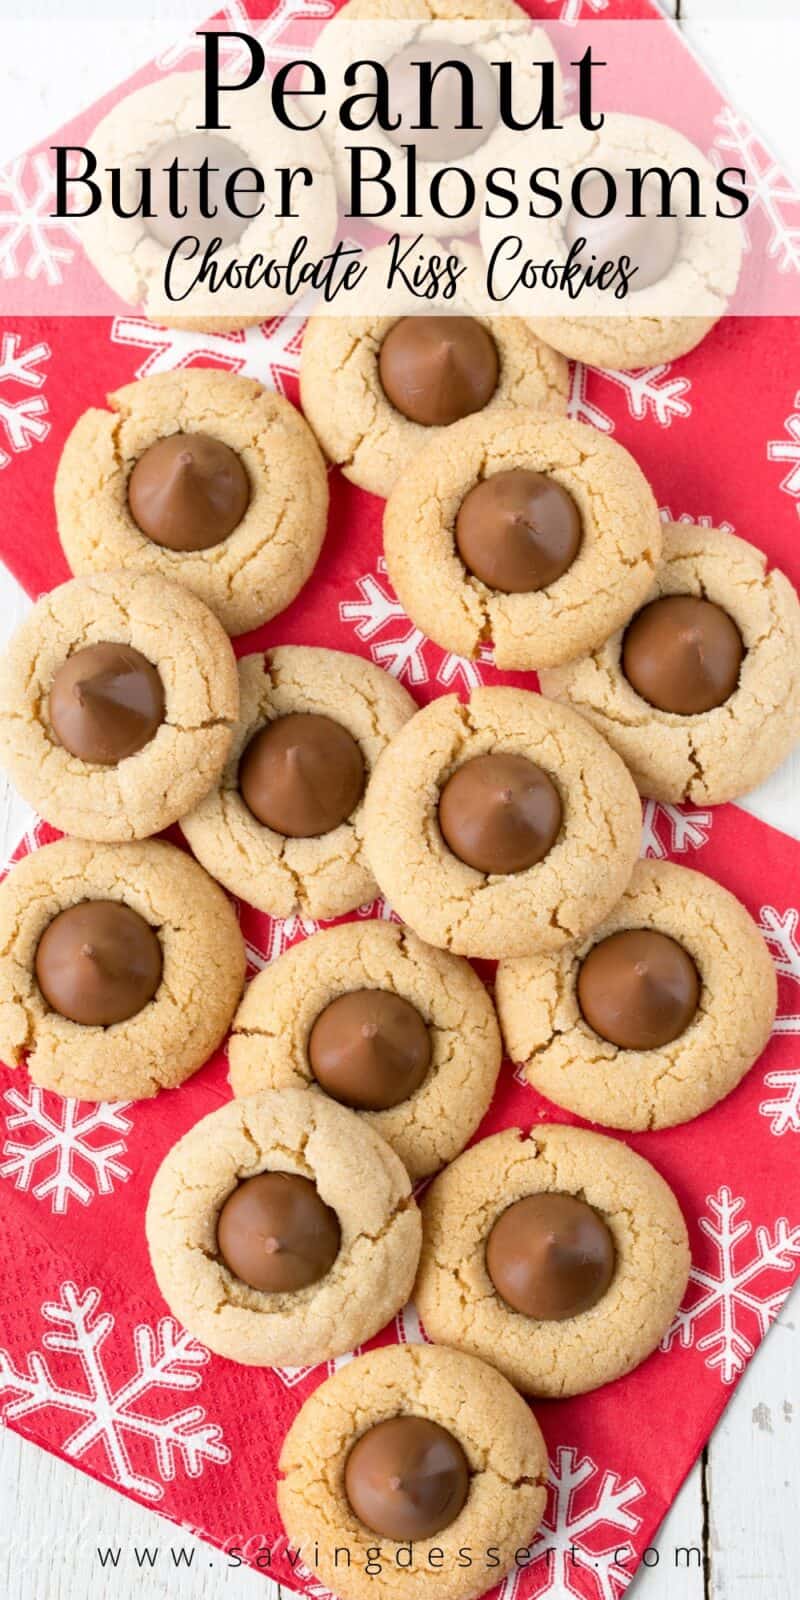 Overhead view of a platter of Chocolate Kiss Cookies a/k/a Peanut Butter Blossoms